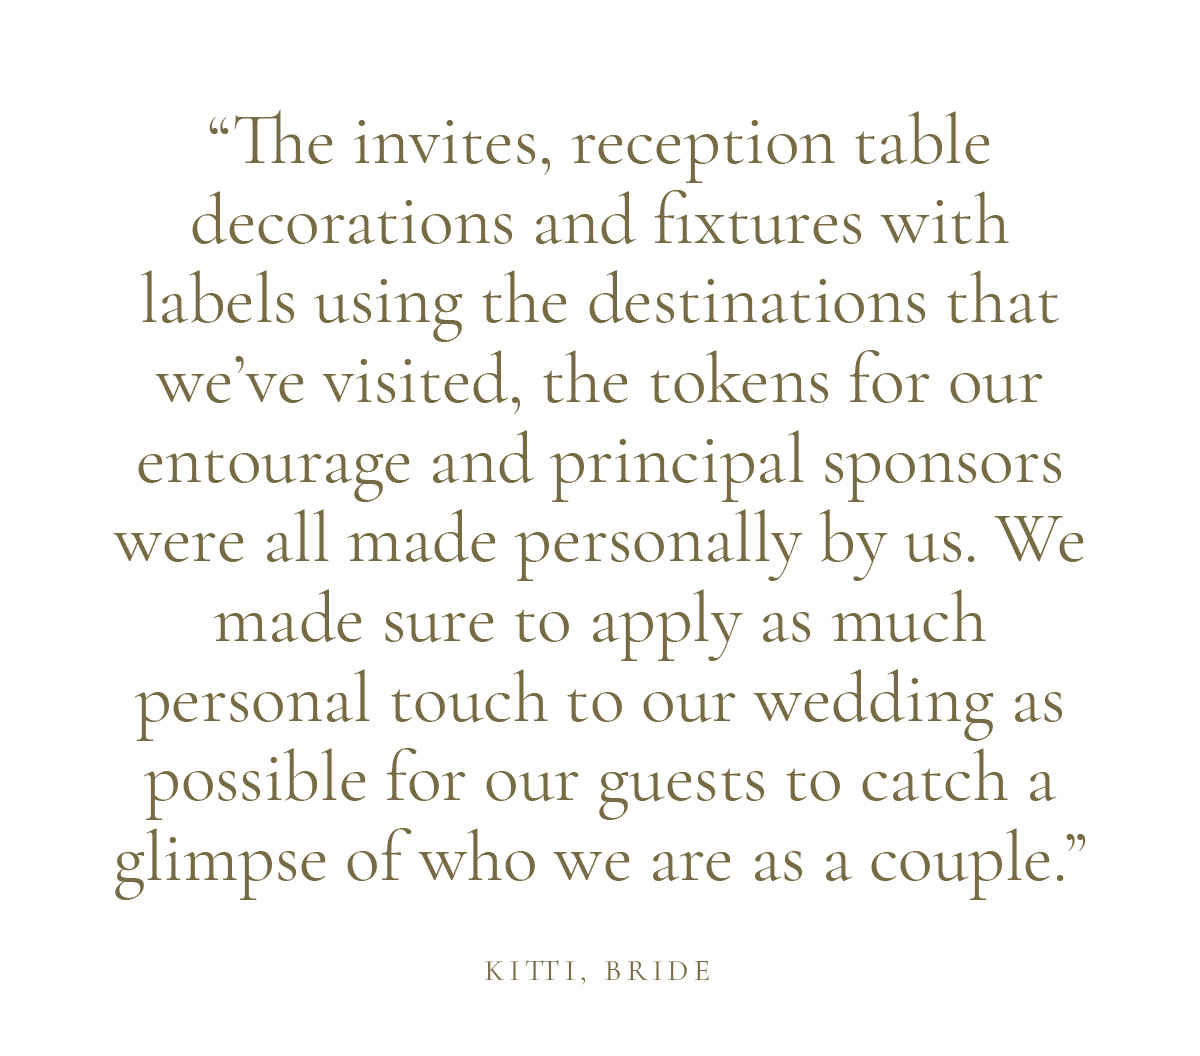 "The invites, reception table decorations and fixtures with labels using the destinations that we’ve visited, the tokens for our entourage and principal sponsors were all made personally by us. We made sure to apply as much personal touch to our wedding as possible for our guests to catch a glimpse of who we are as a couple." Kitti, Bride